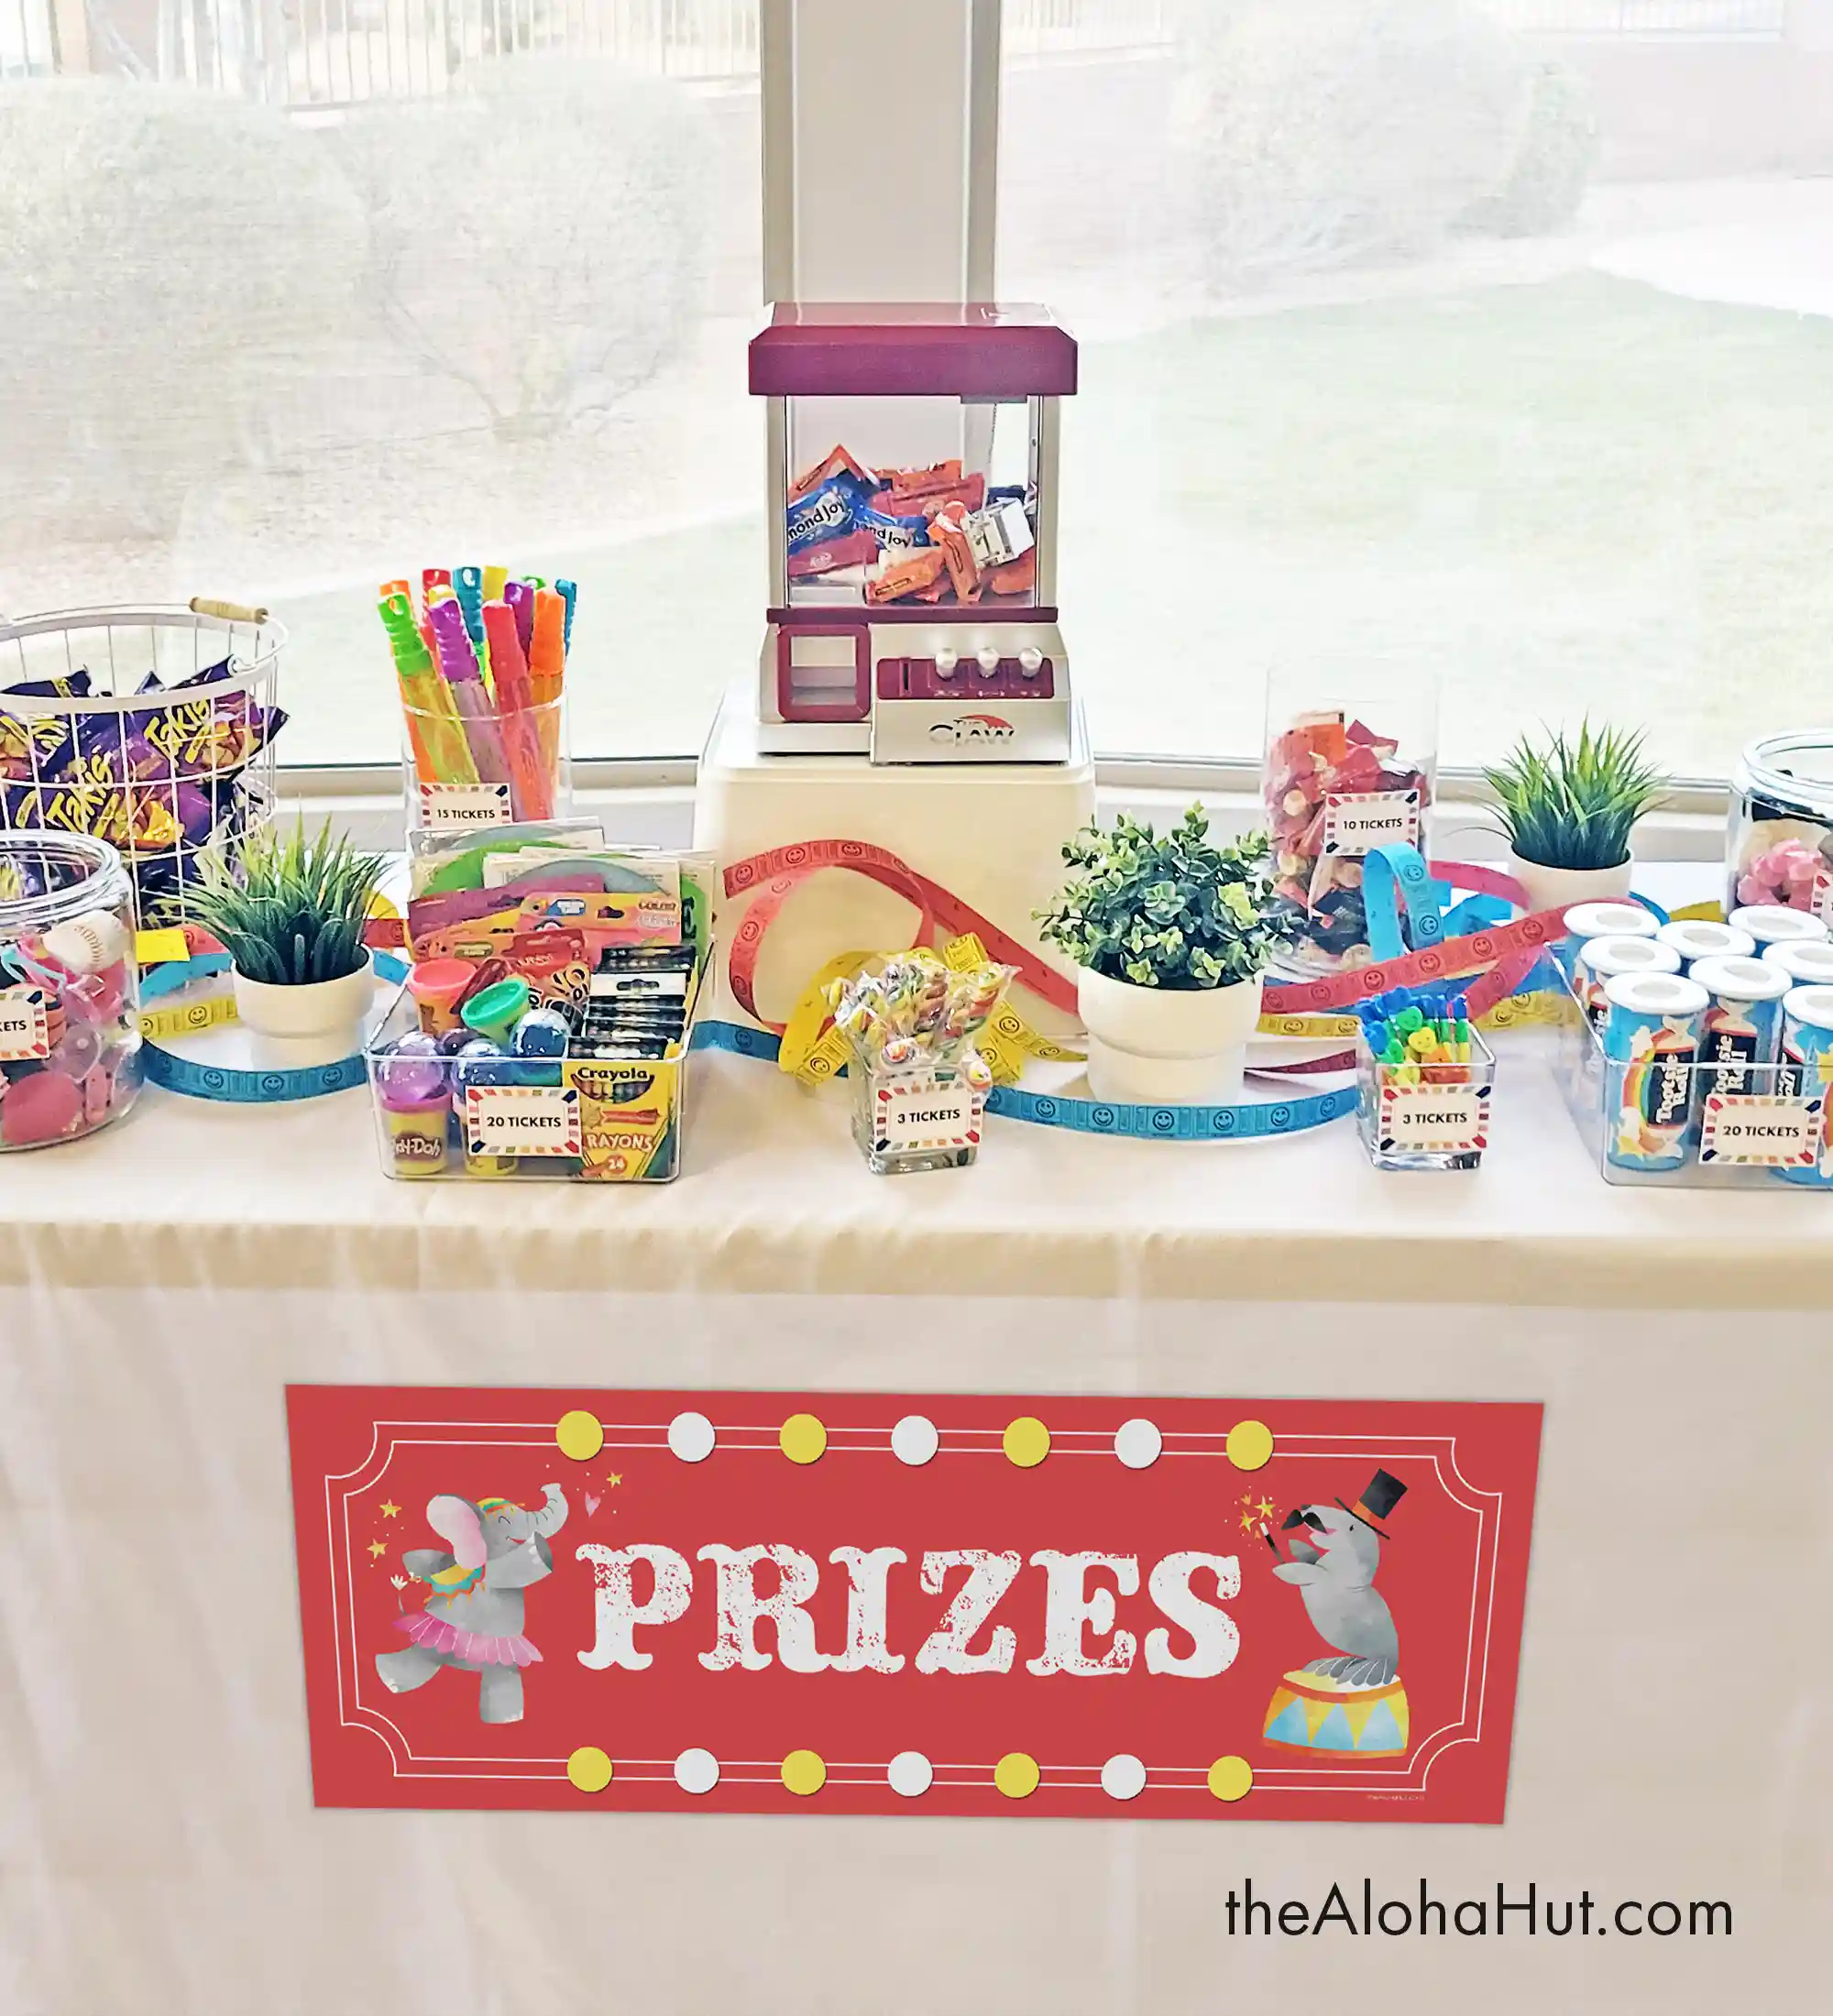 Carnival Party Ideas - Prize Sign